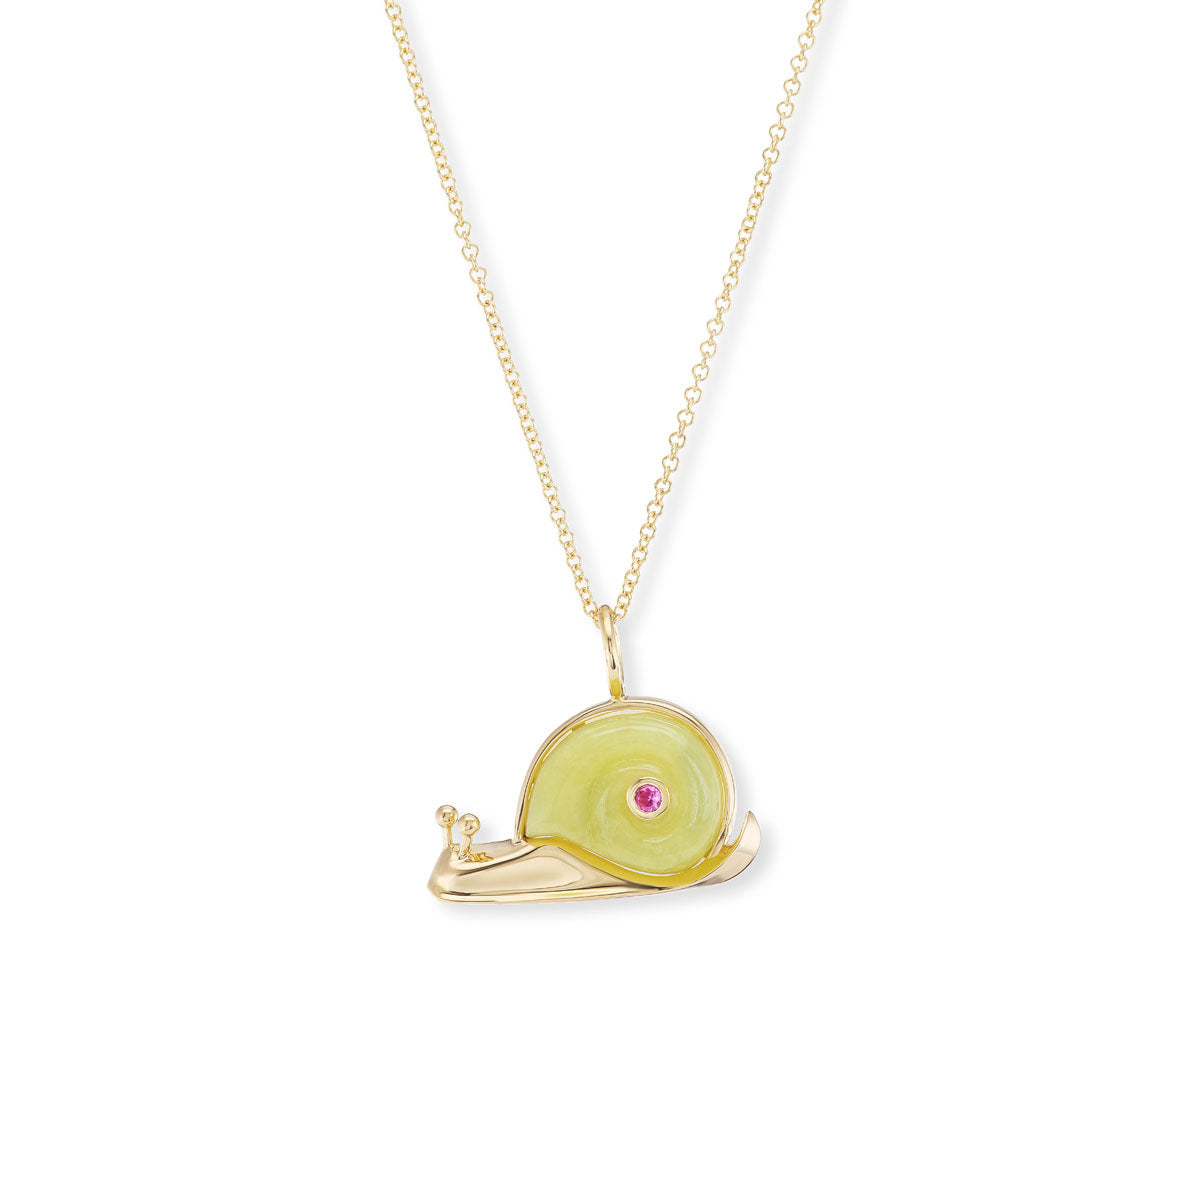 Large Snail Pendant with Coral Shell – Brent Neale